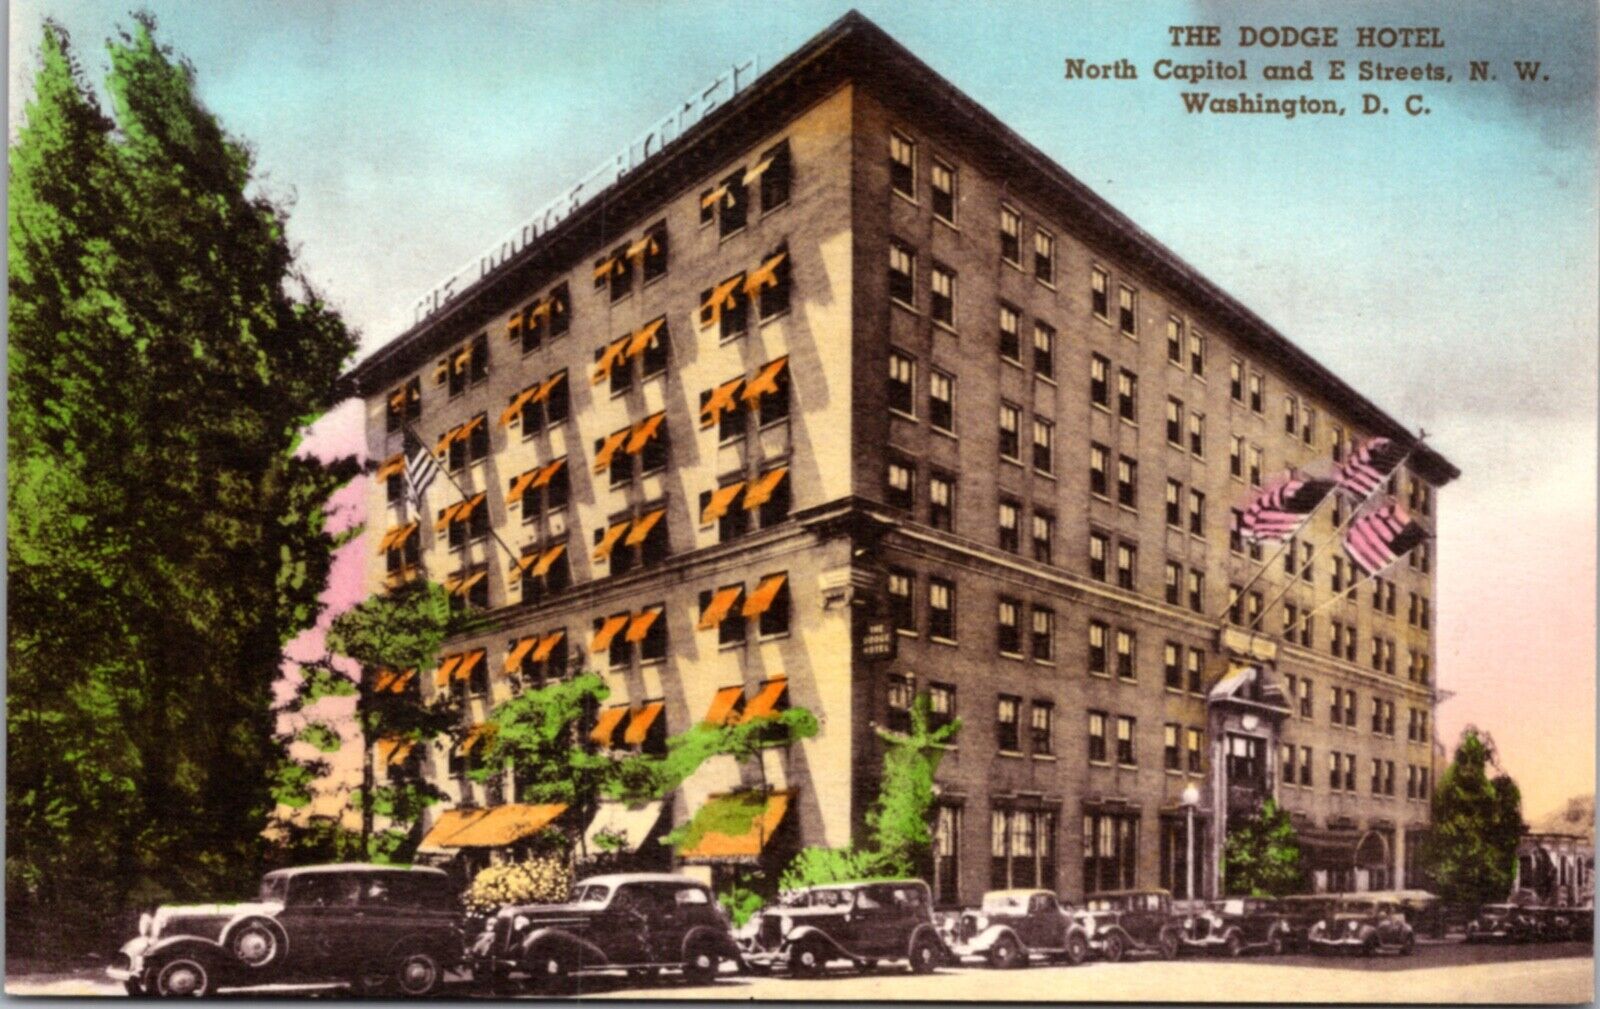 Hand Colored PC The Dodge Hotel North Capitol and E Streets N.W. Washington D.C.